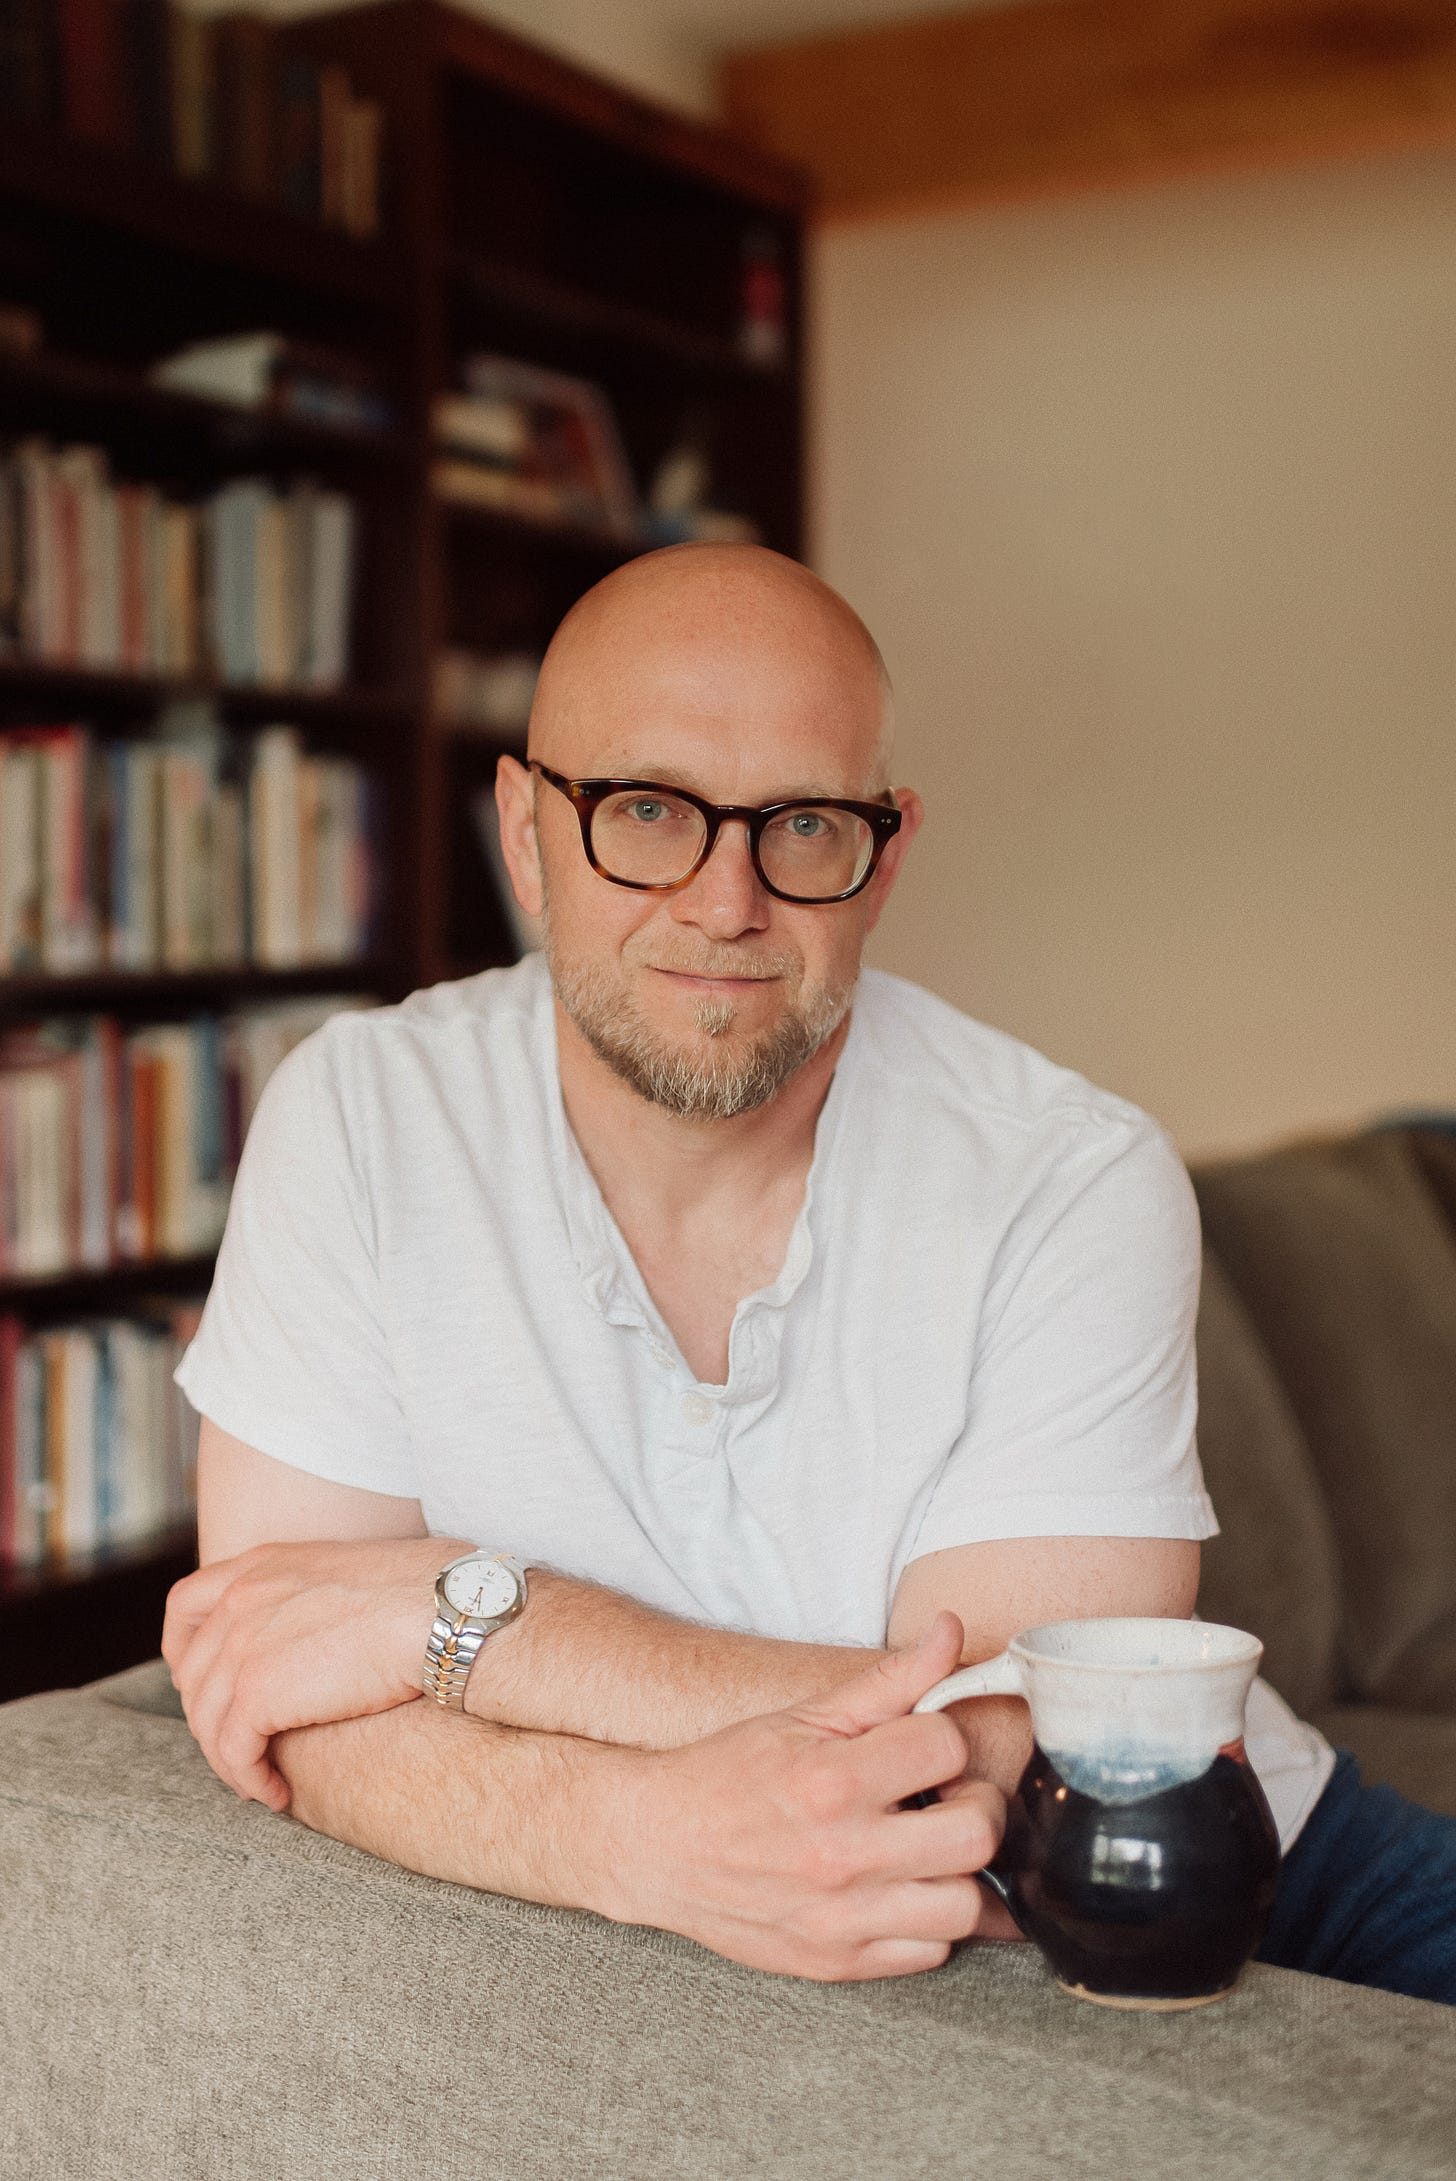 A bald man with a beard and glasses is leaning on the back of a couch, holding a ceramic mug. He is wearing a white short-sleeved henley shirt and a silver watch on his left wrist. He is smiling slightly and looking directly at the camera. In the background, there is a bookshelf filled with books, suggesting a cozy and intellectual setting.